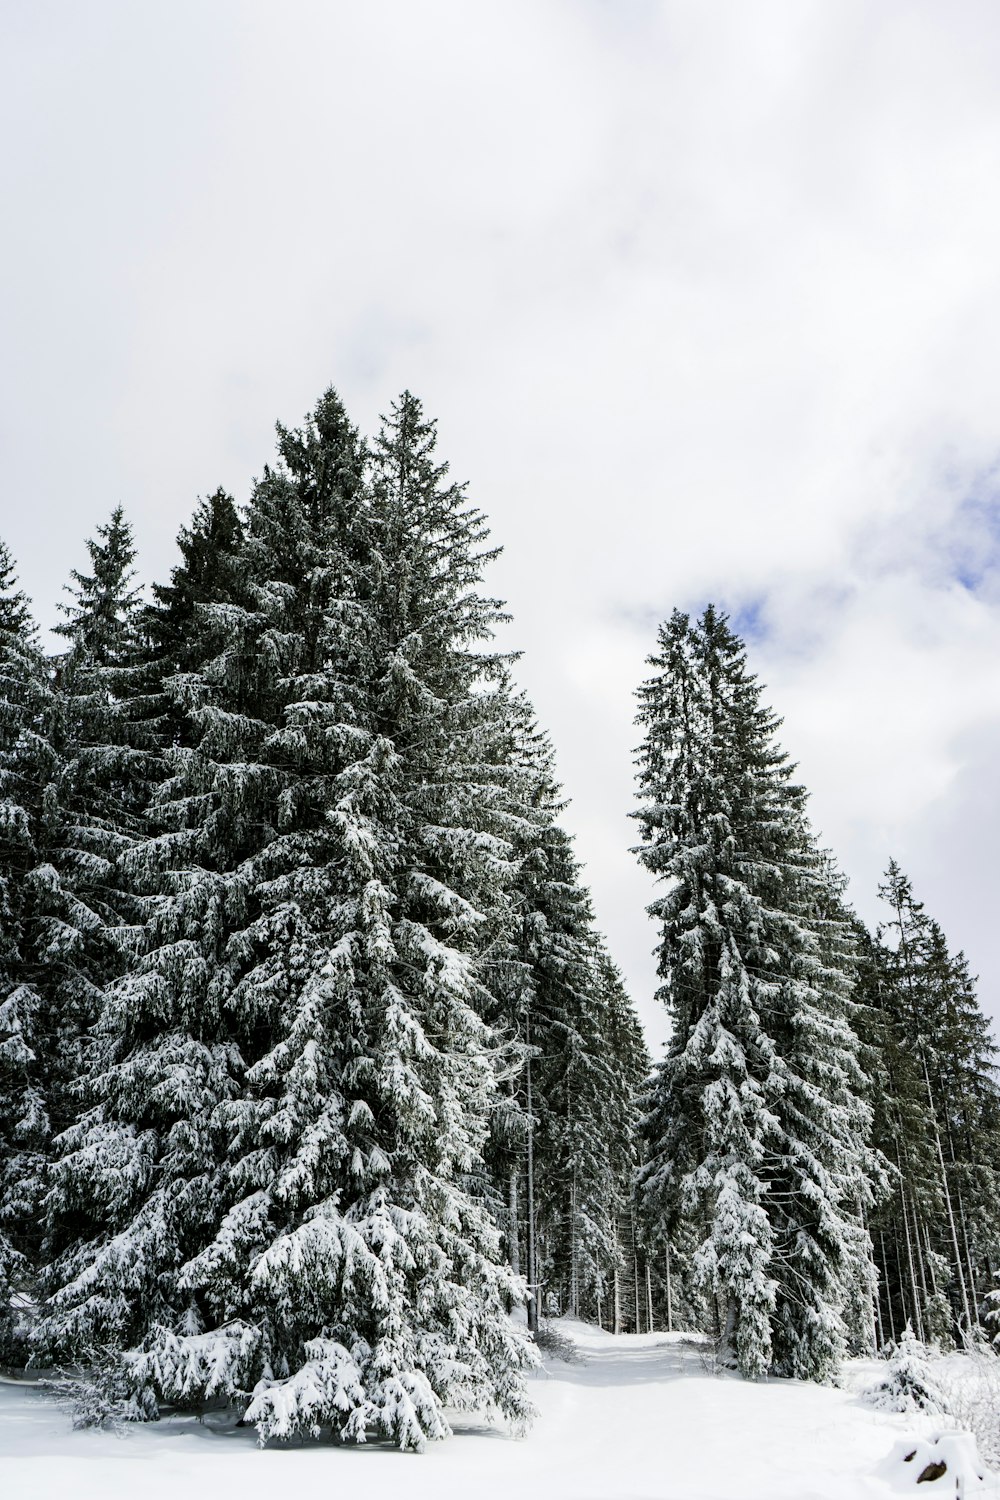 snow covered pine trees under white clouds and blue sky during daytime